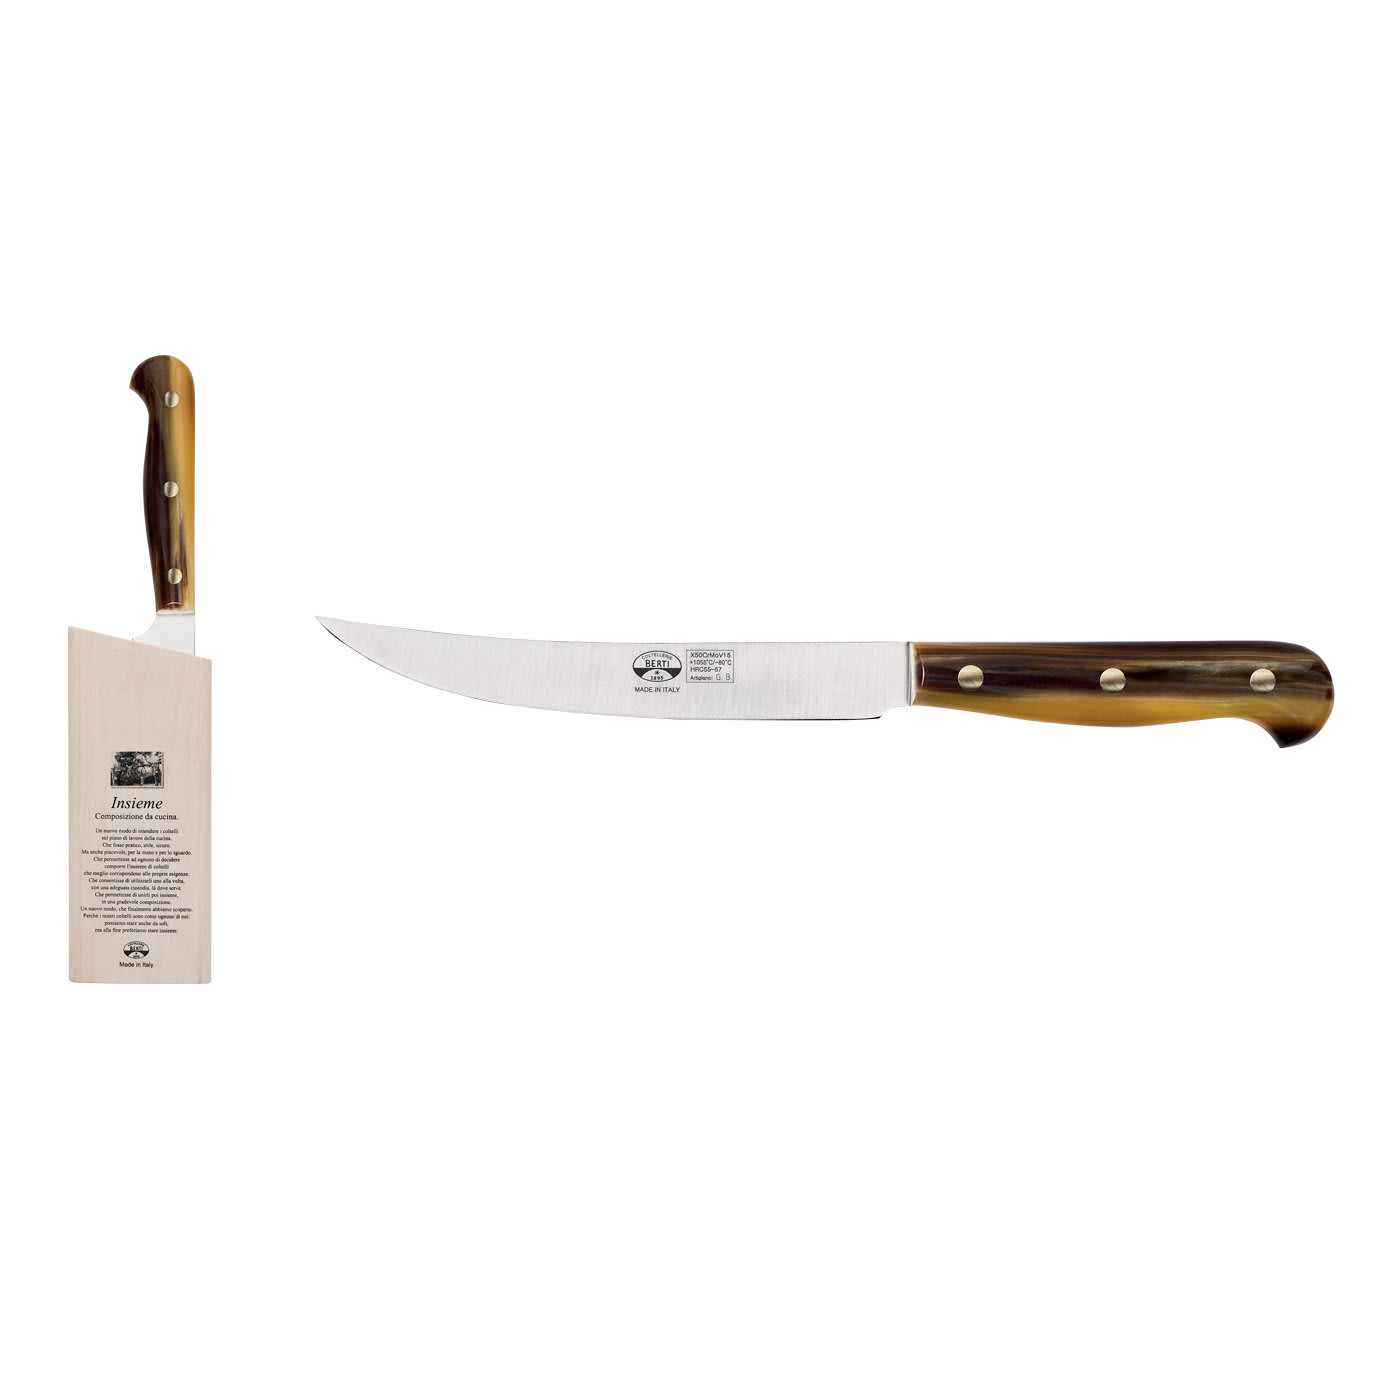 Insieme Set of Block and Bone Knife with Conrnotech Handle - Coltellerie Berti